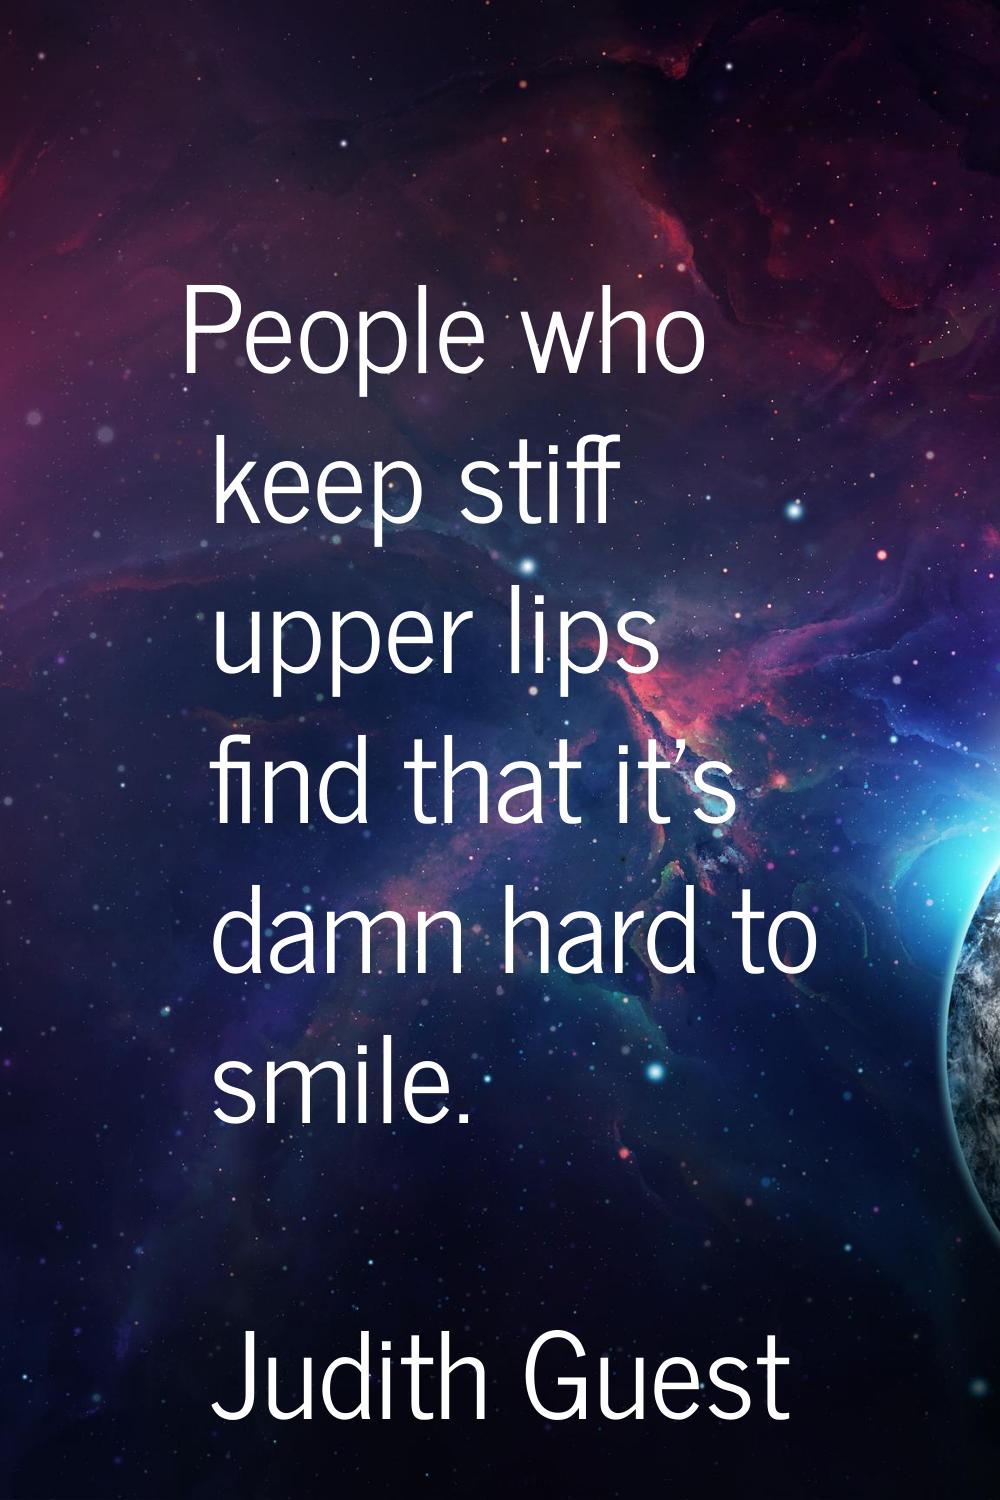 People who keep stiff upper lips find that it's damn hard to smile.